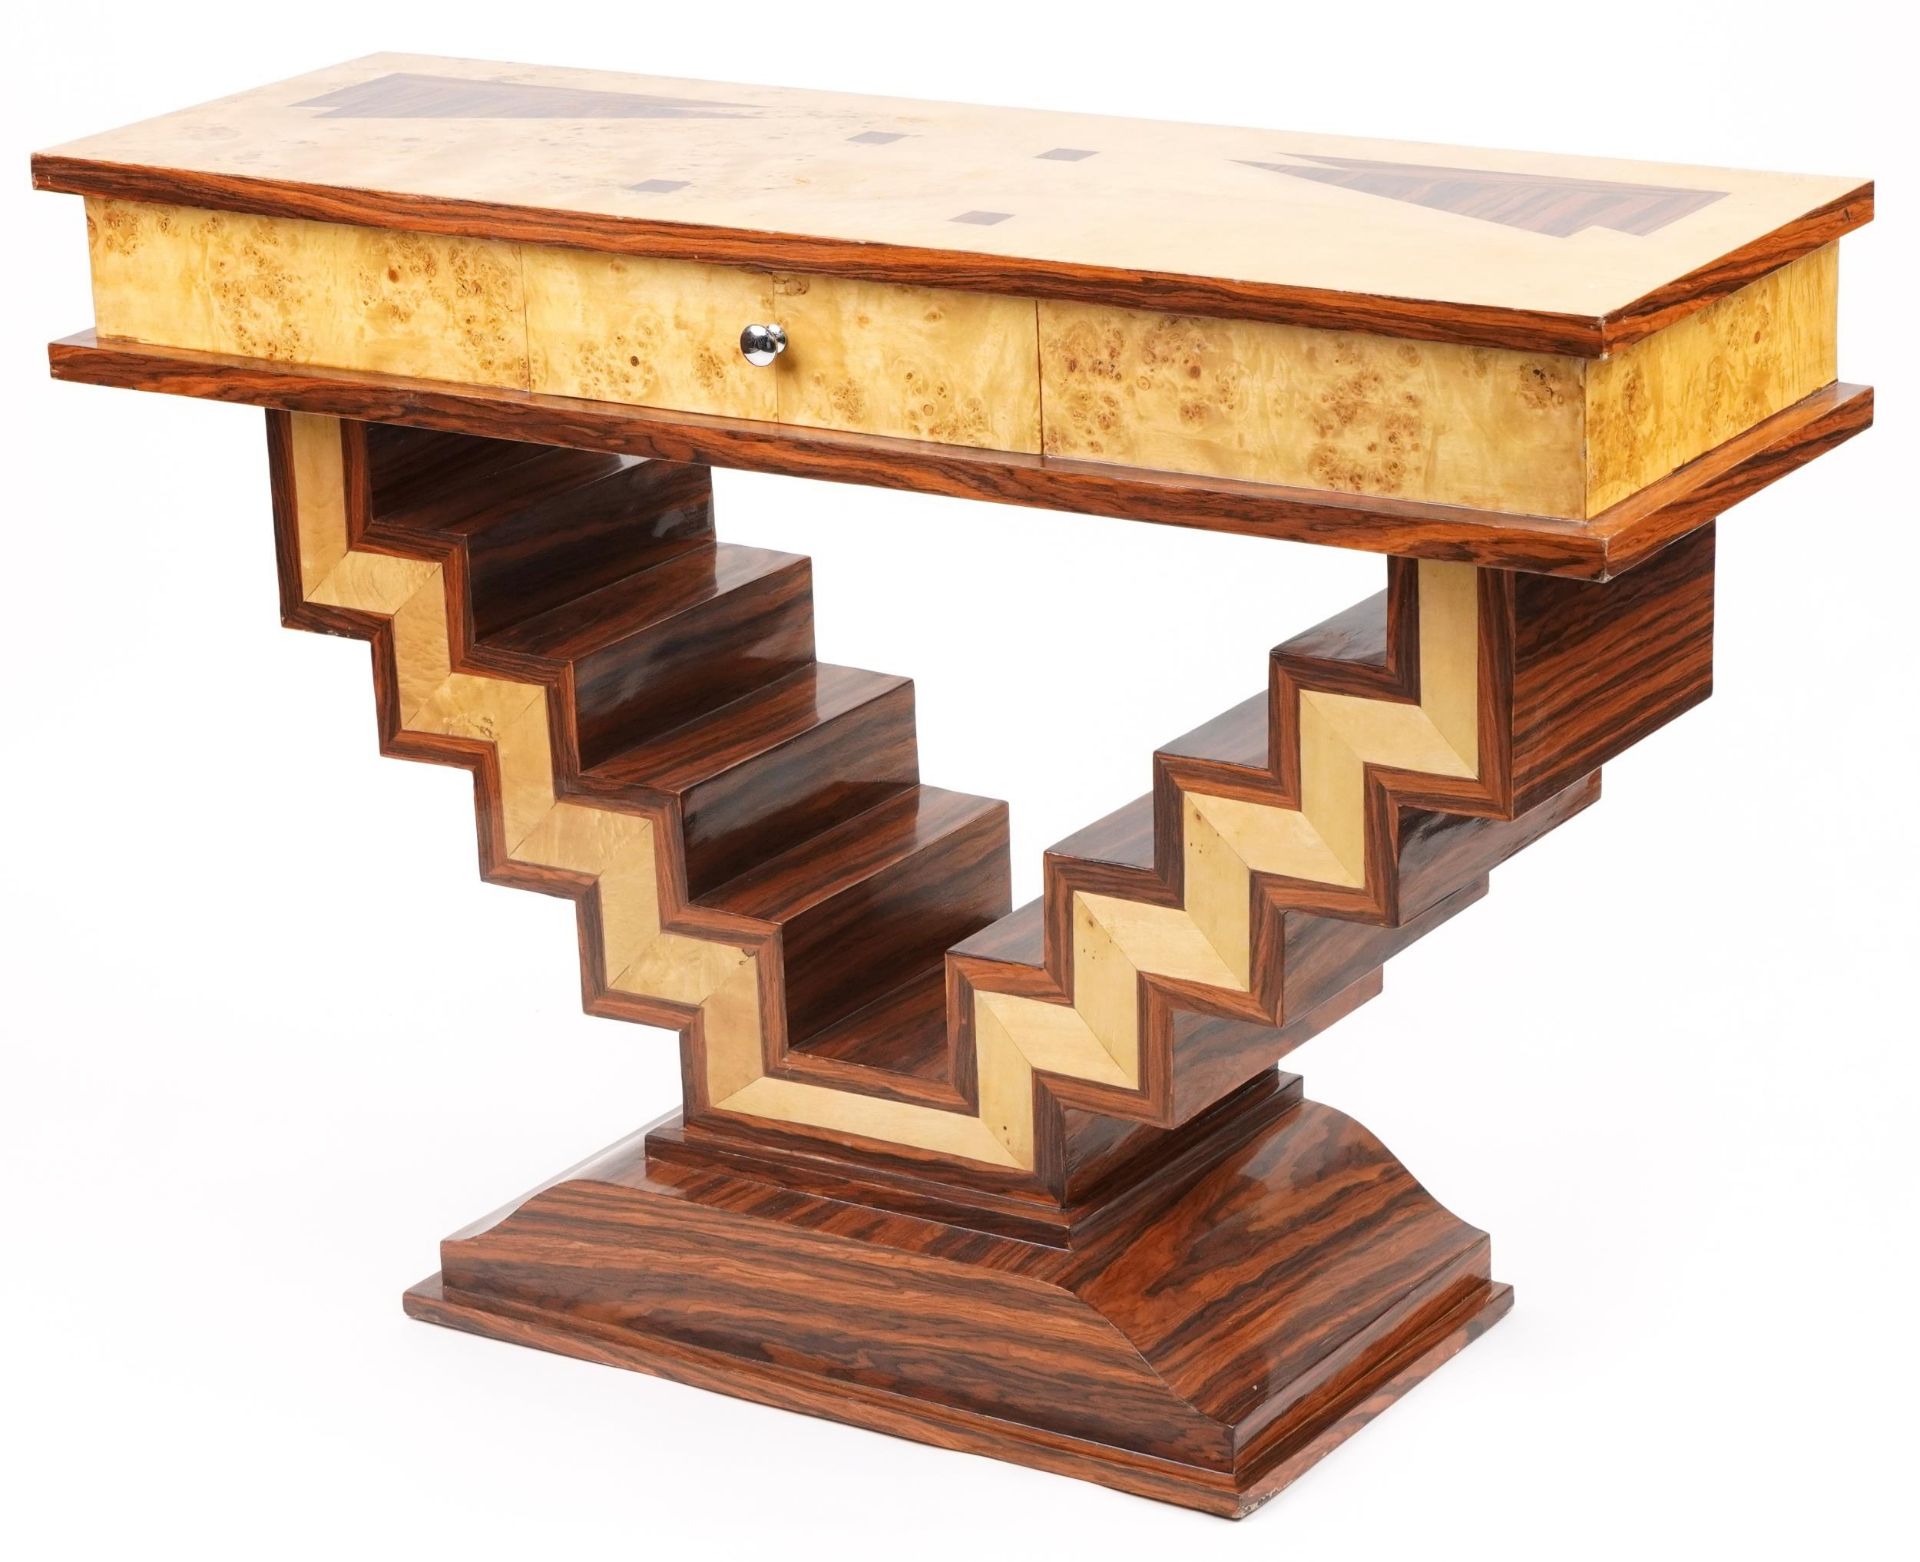 Art Deco style walnut and rosewood effect console table with frieze drawer, 84cm H x 120cm W x